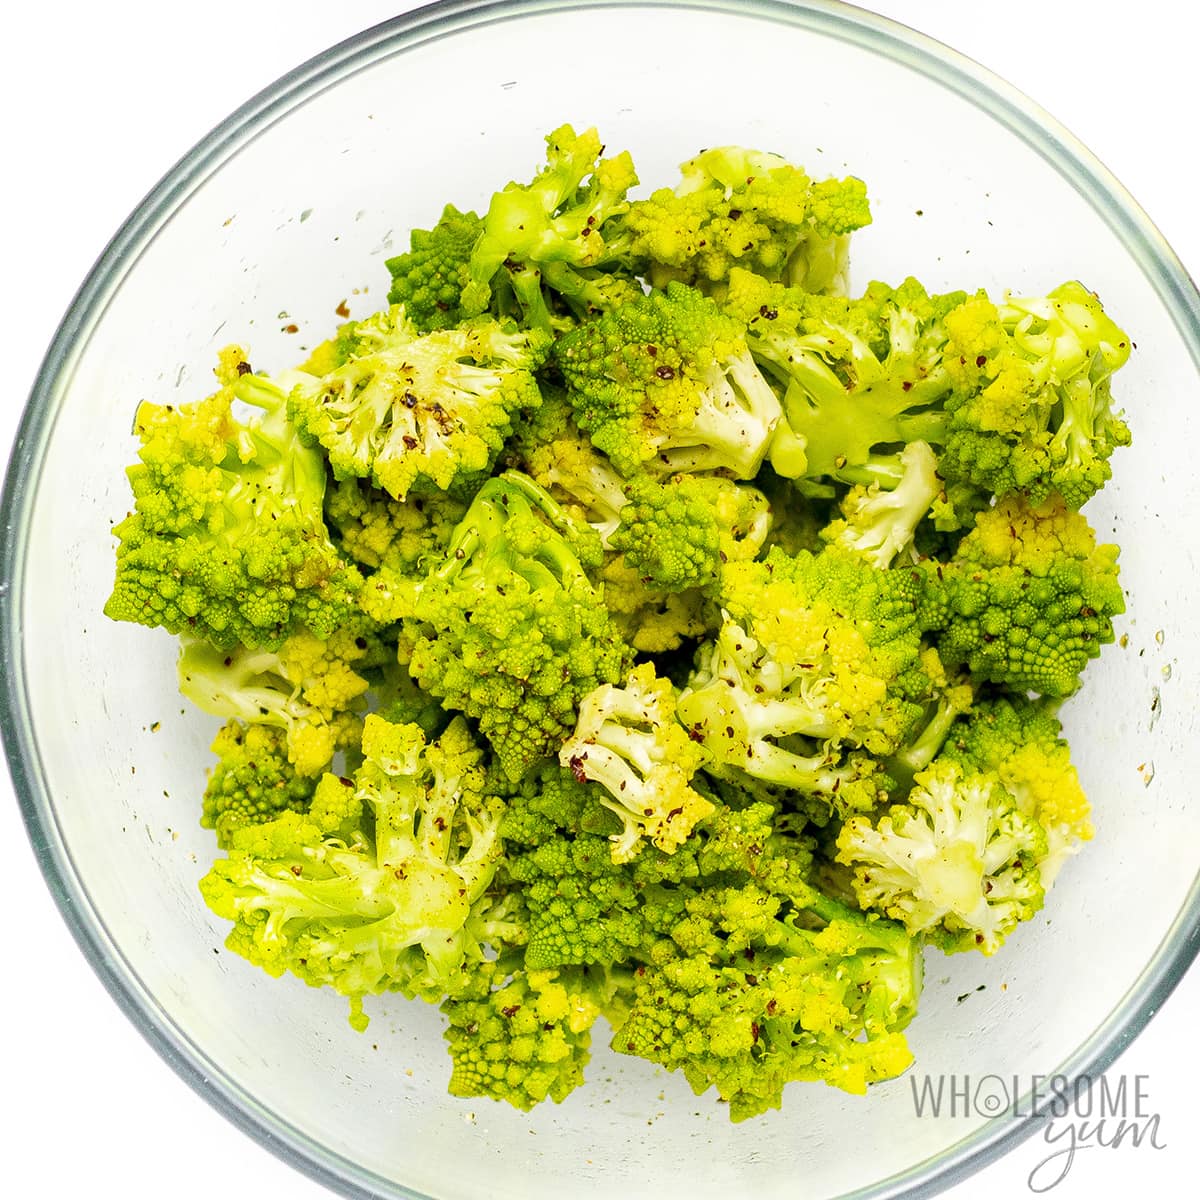 Chopped romanesco tossed with oil and seasonings.